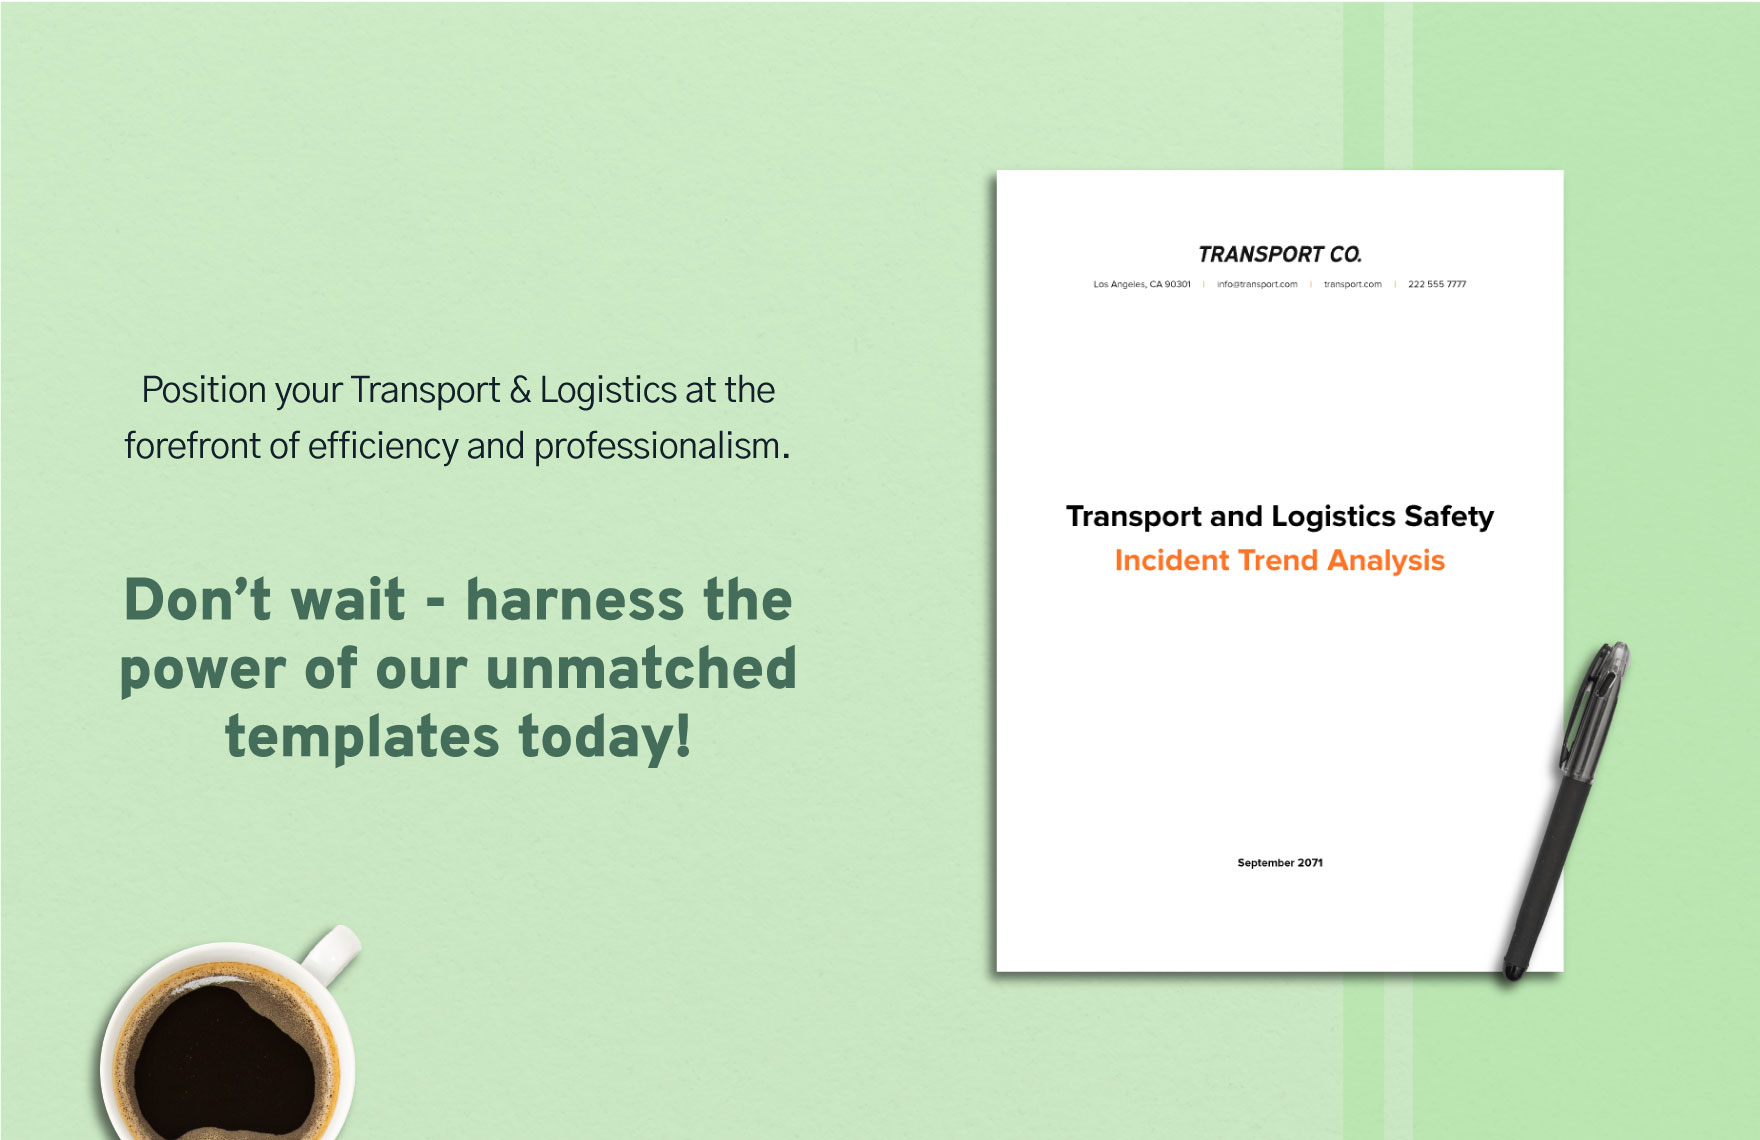 Transport and Logistics Safety Incident Trend Analysis Template